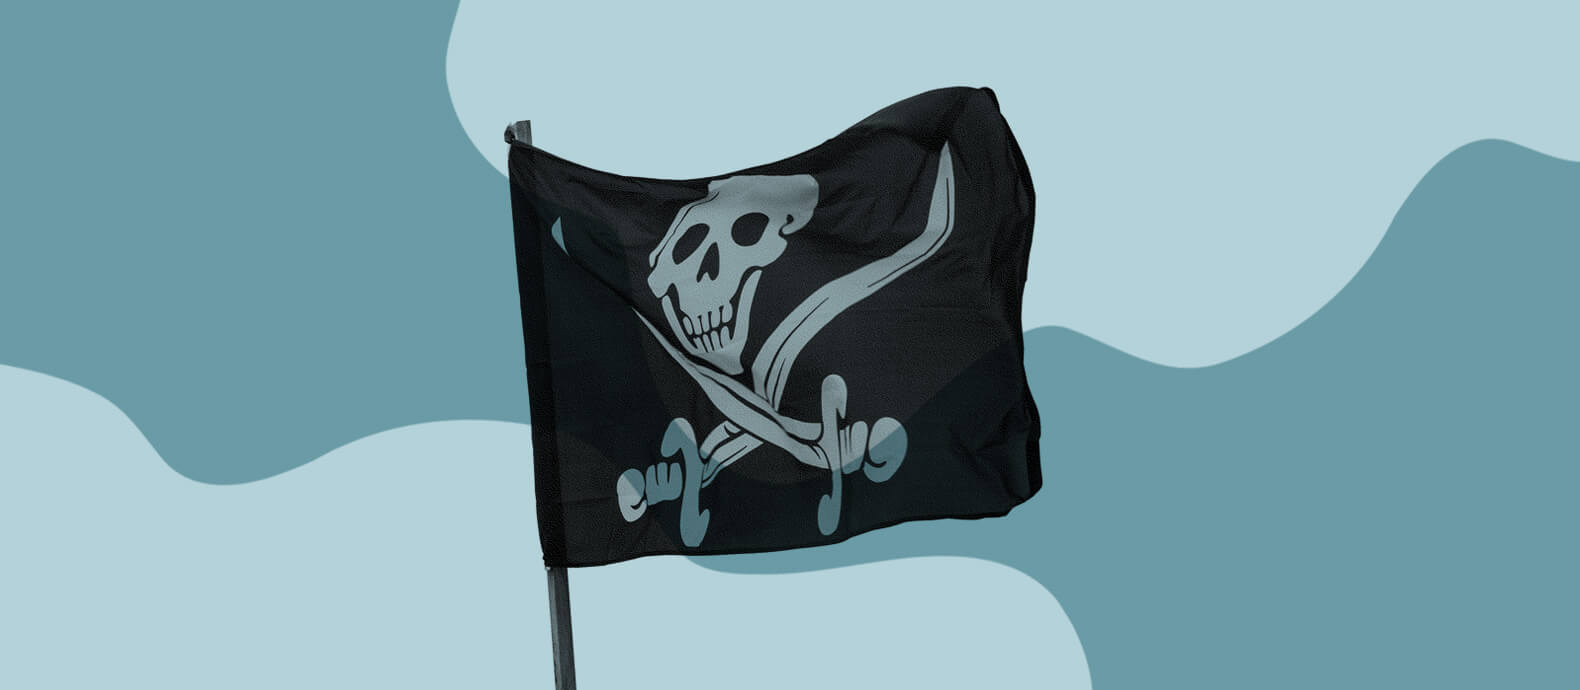 What is the impact of piracy on businesses